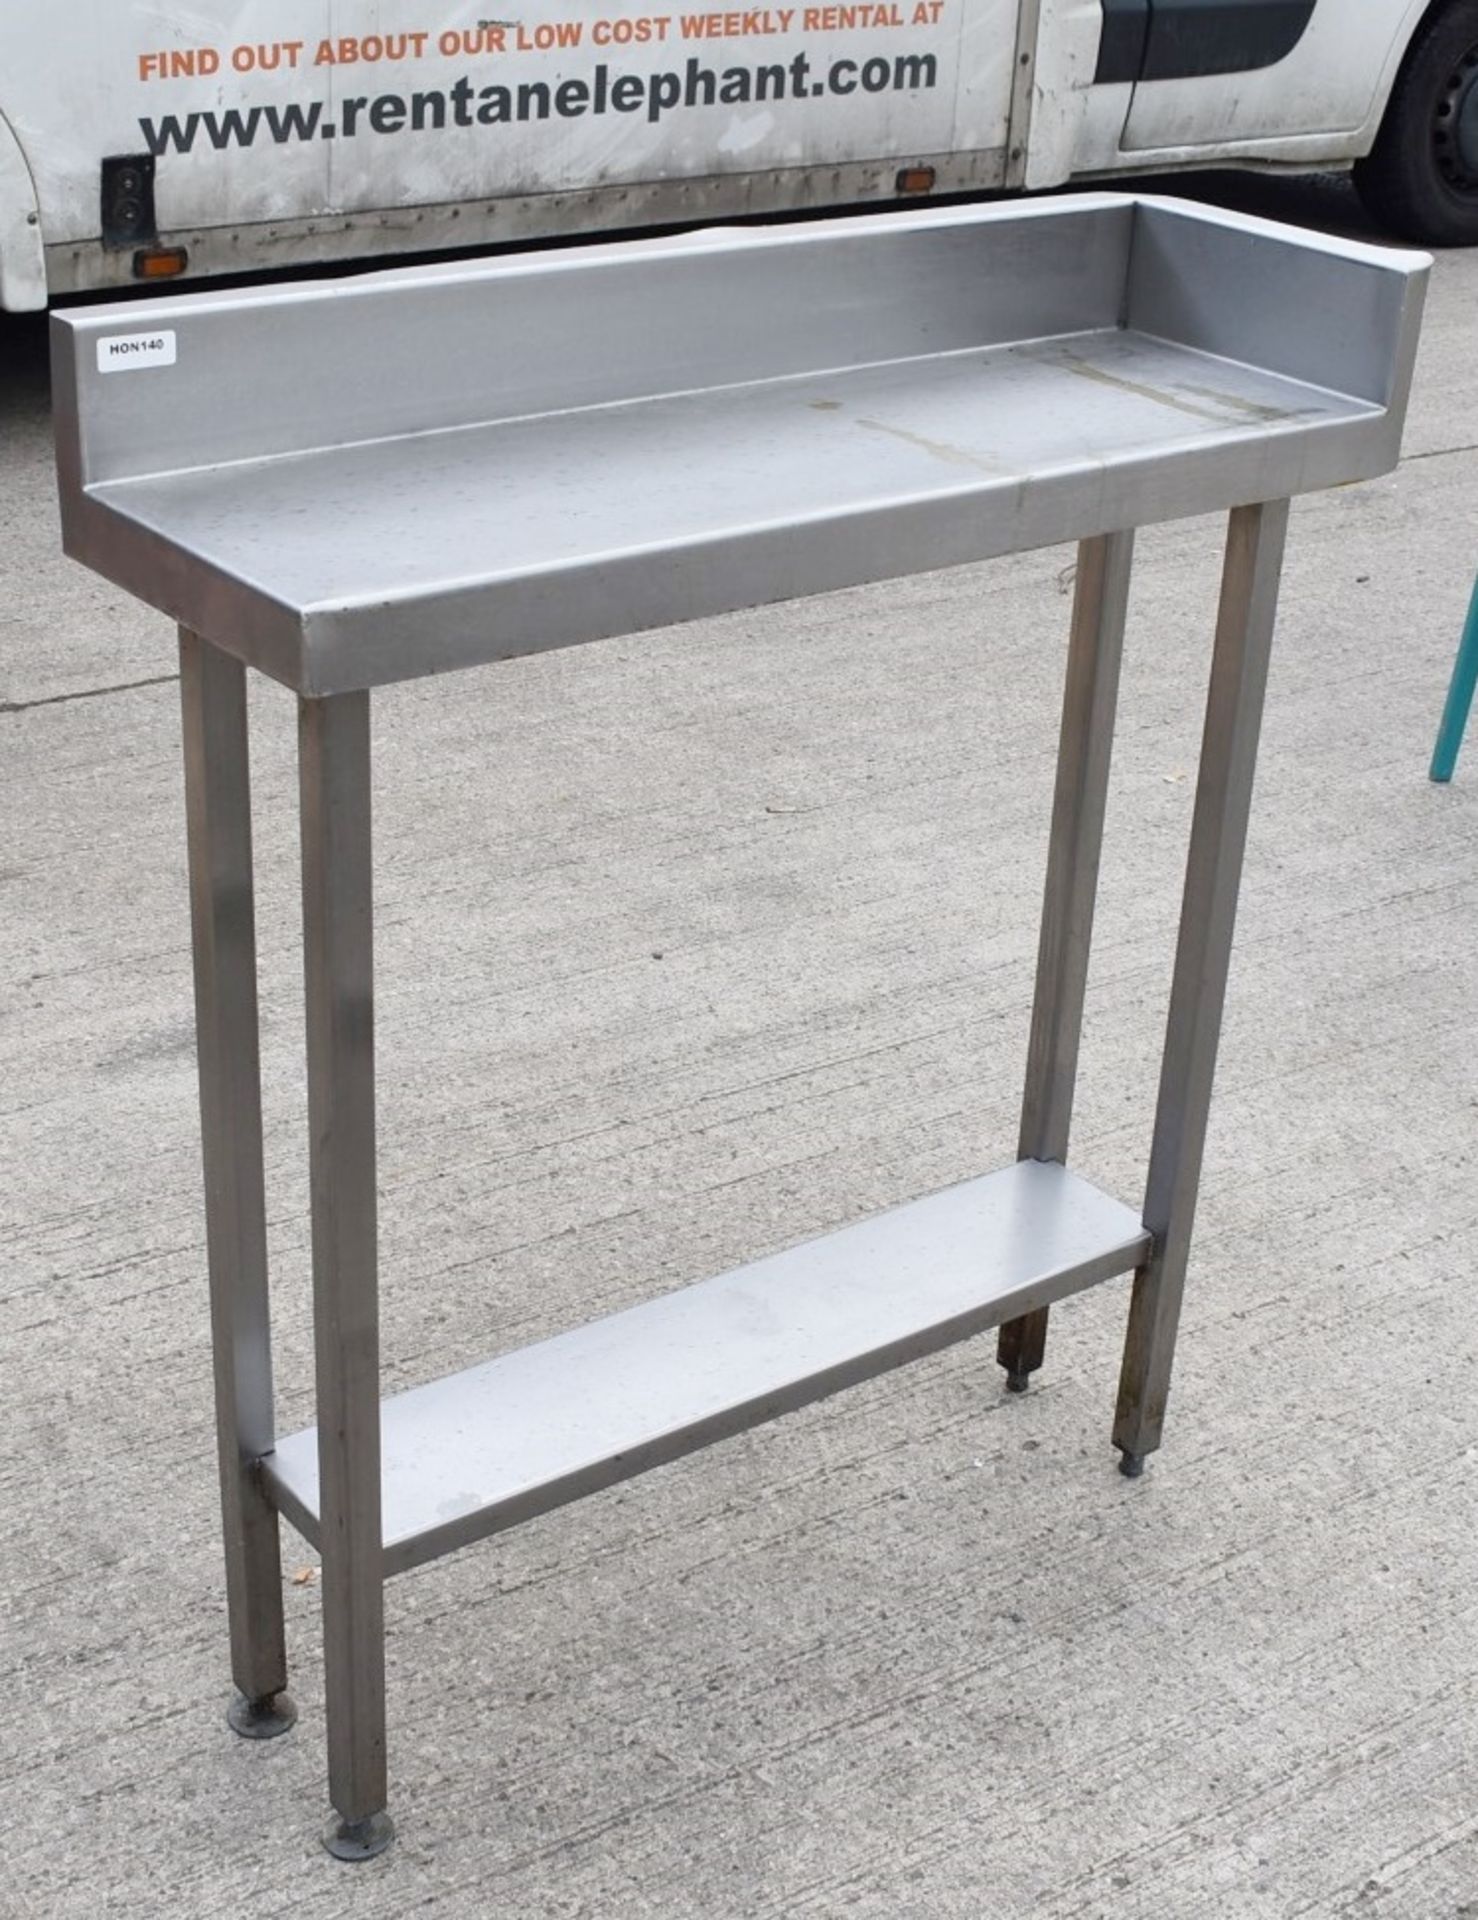 1 x Stainless Steel Corner Infill Prep Bench - Dimensions: H91 x W30 x D90 cms - CL740 - Ref: HON140